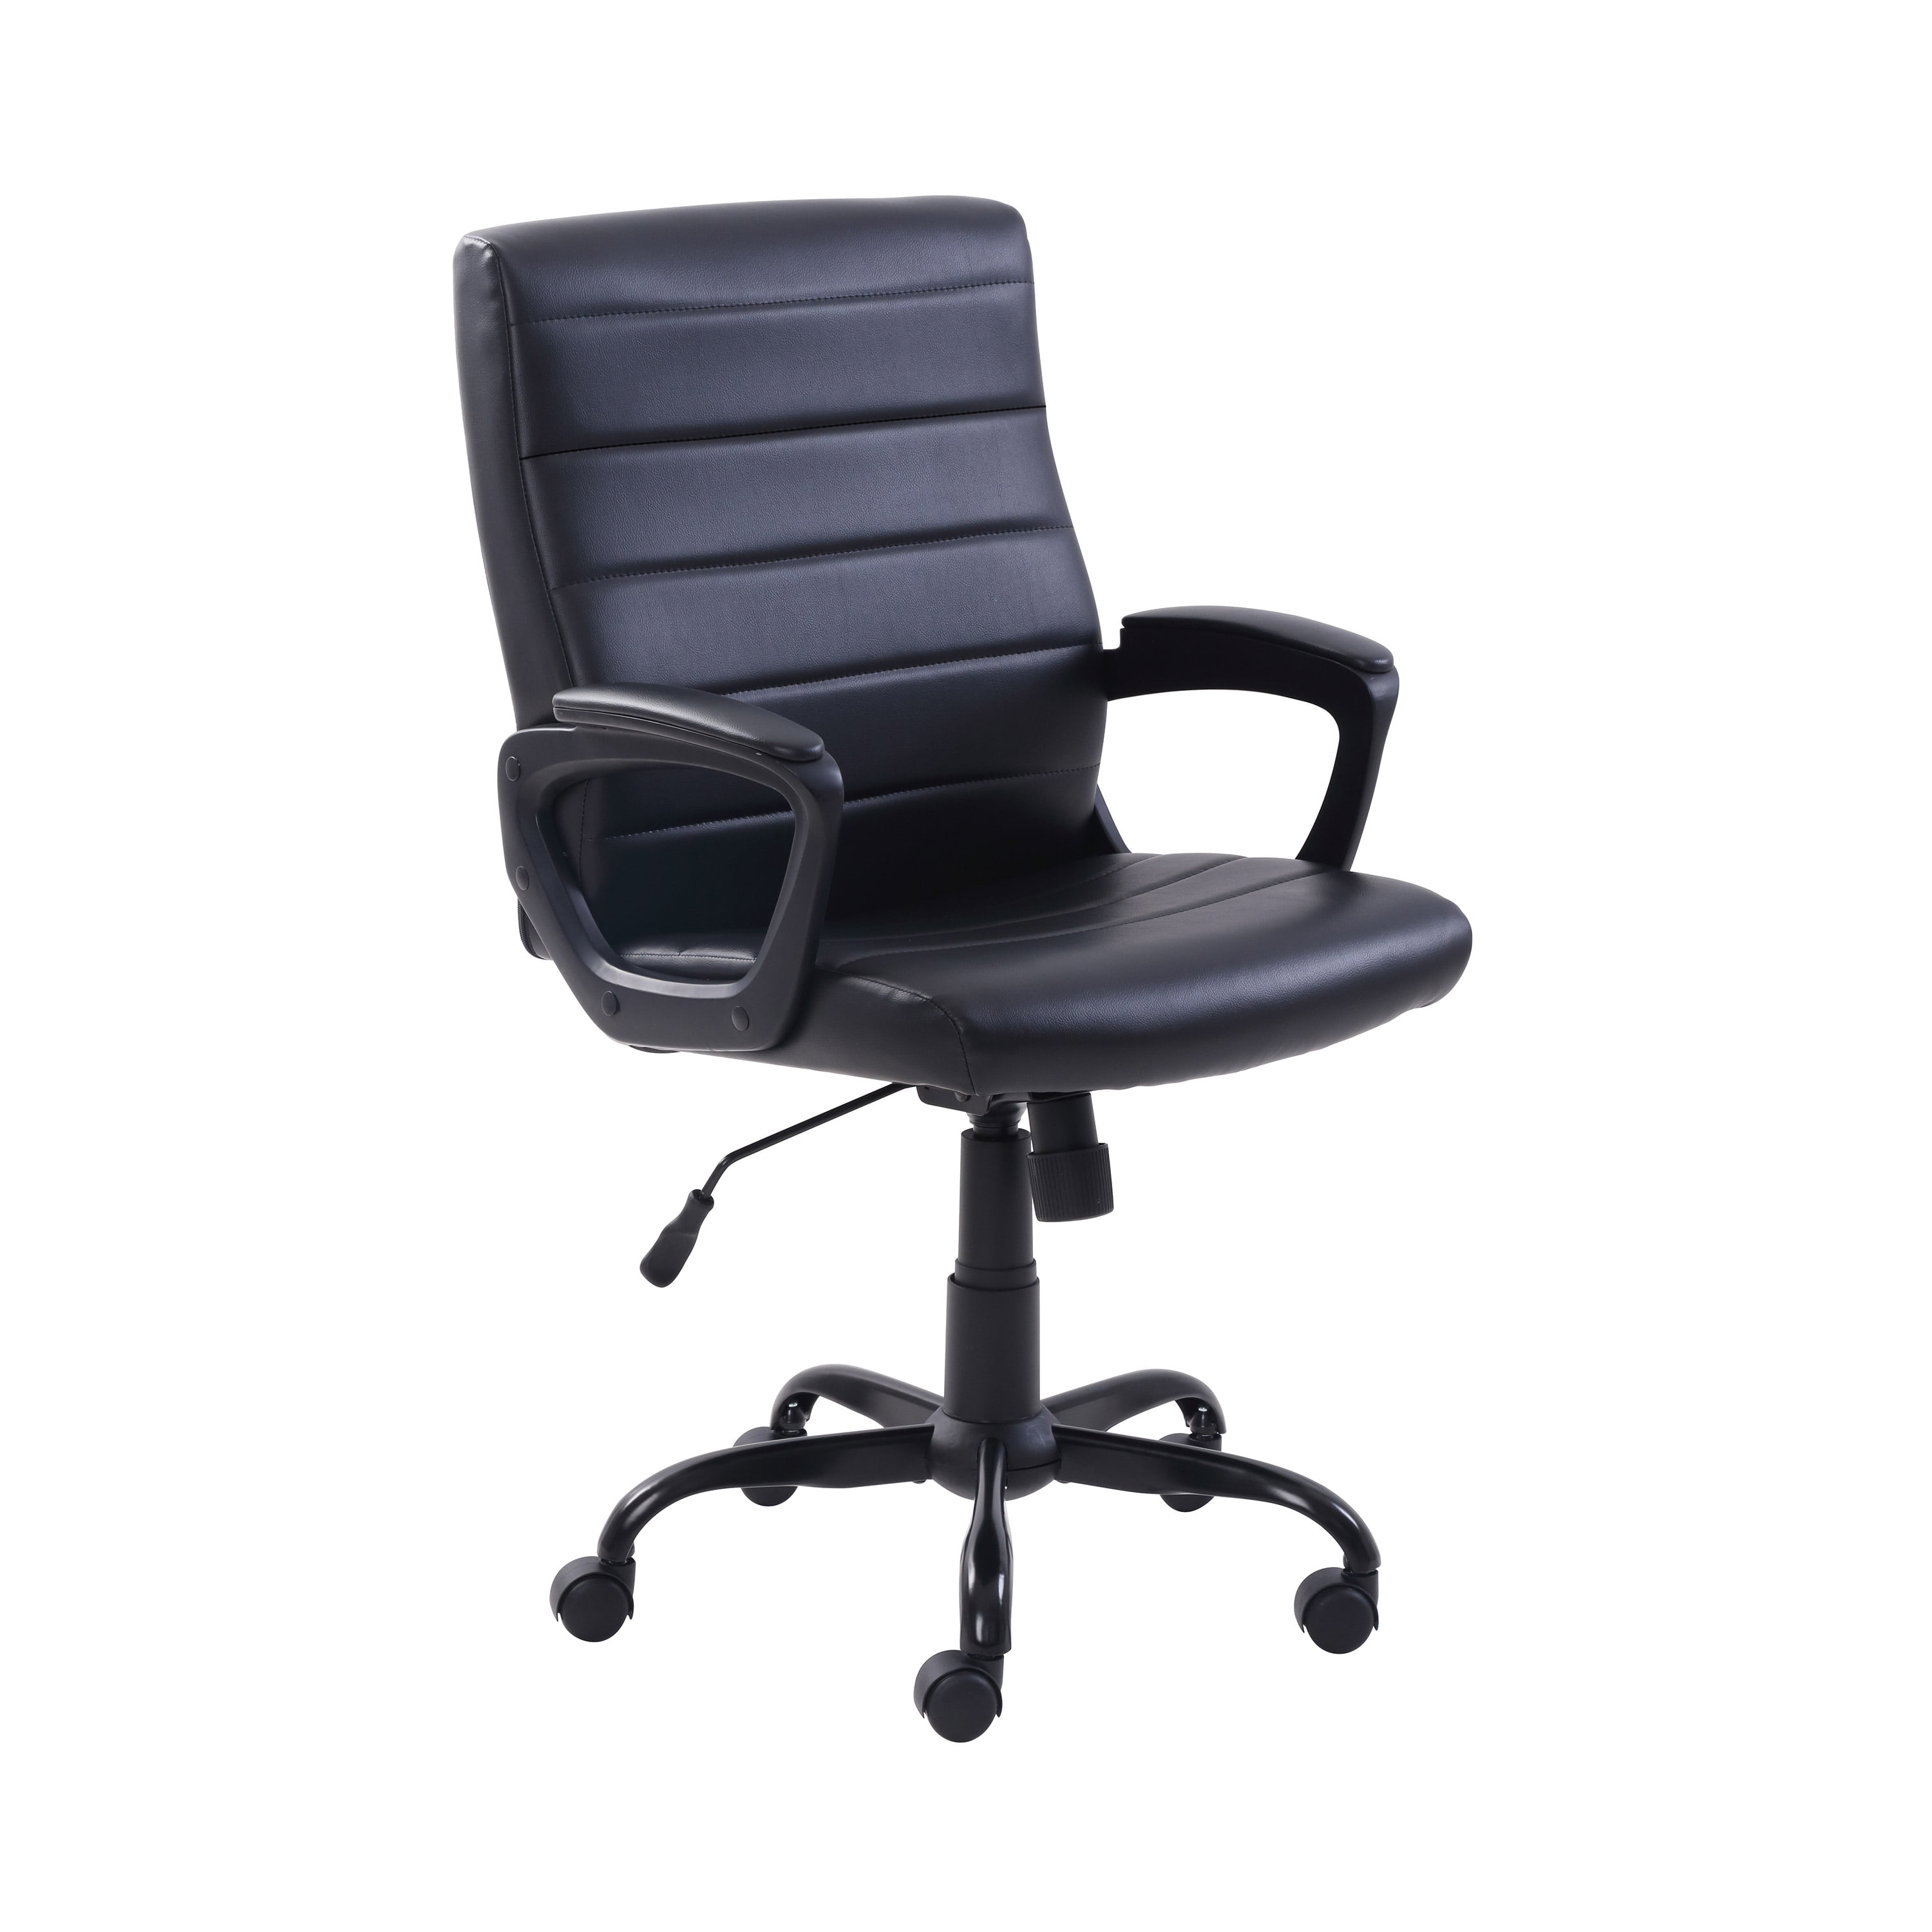 Mainstays Bonded Leather Mid-Back Manager's Office Chair, Multiple Finishes